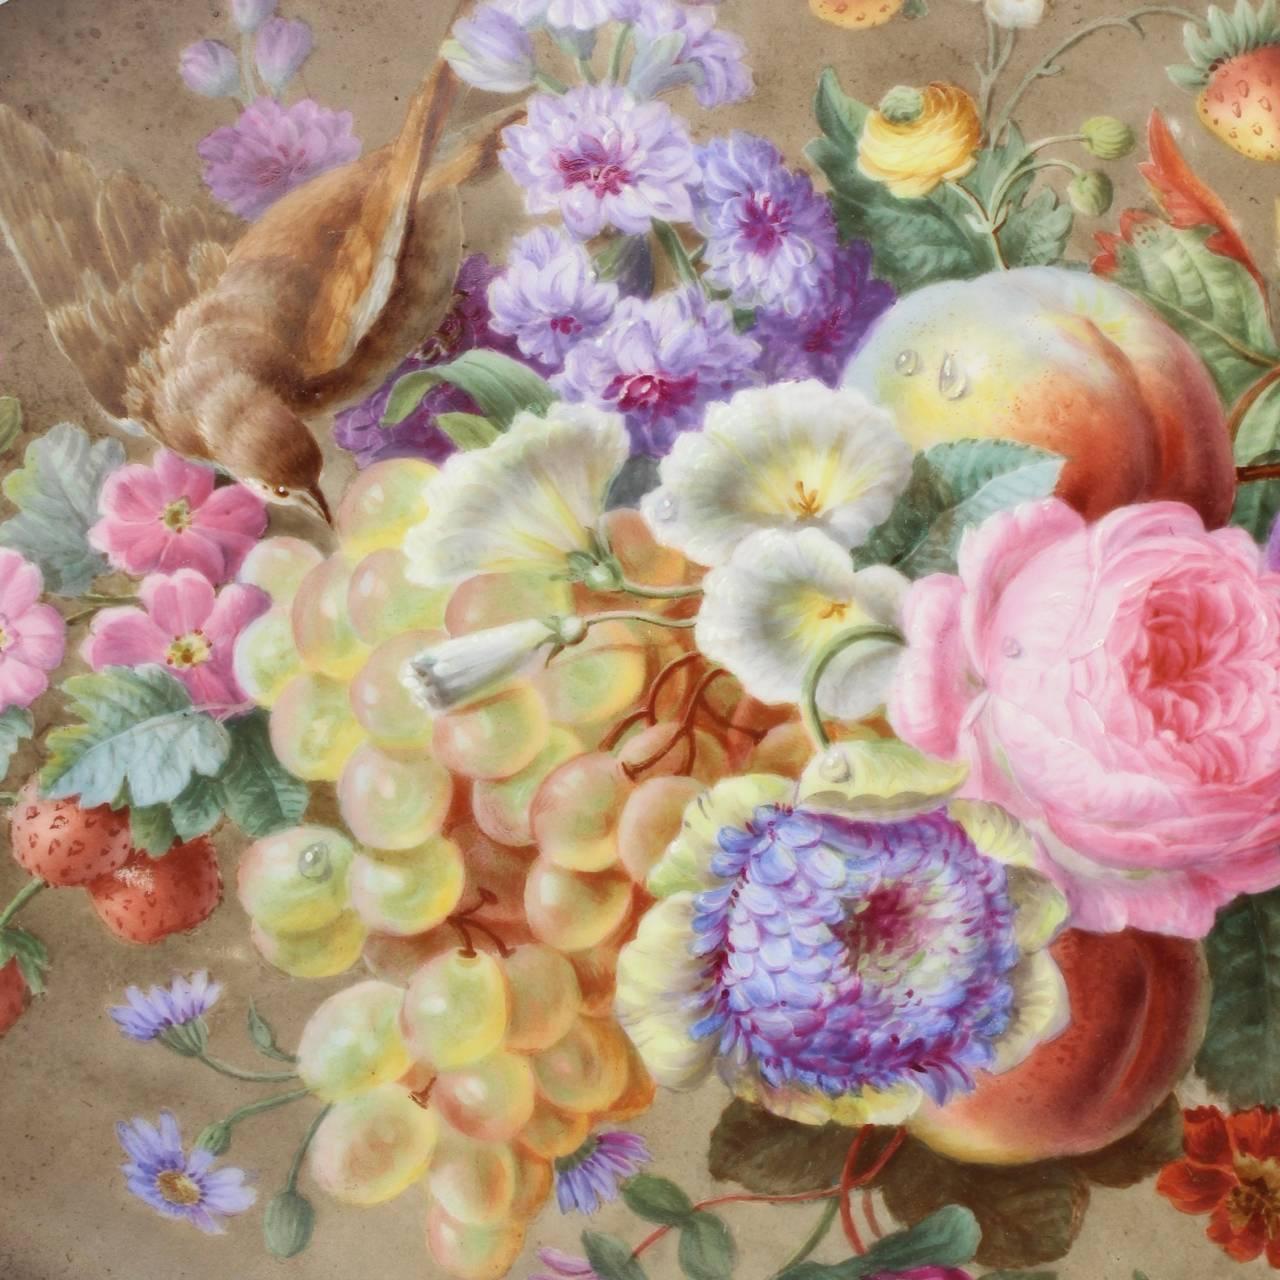 Hand-Painted Large Antique English Porcelain Plaque of Fruit, Flowers & a Bird, 19th Century